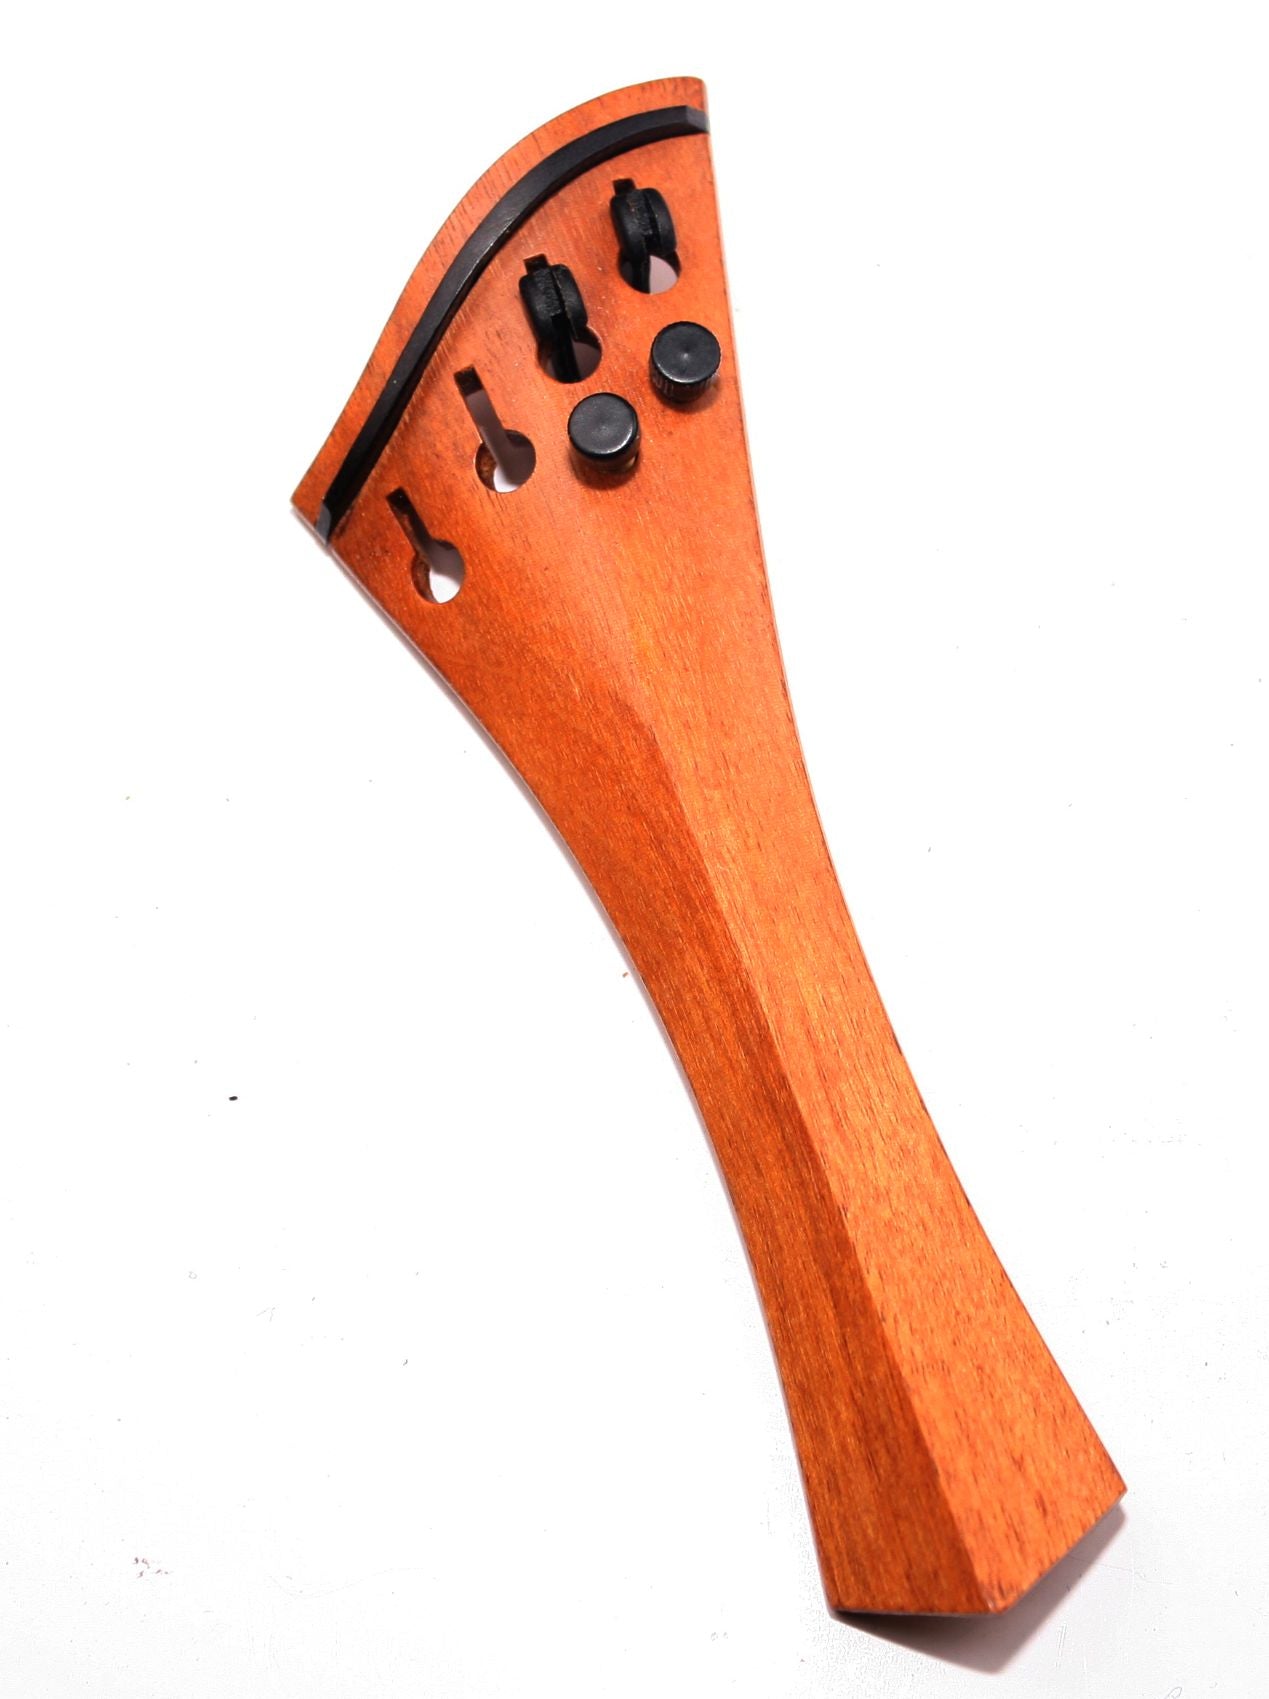 Viola tailpiece-"Schmidt Harp style"-Pernambuco-2 tuners-unstained wood